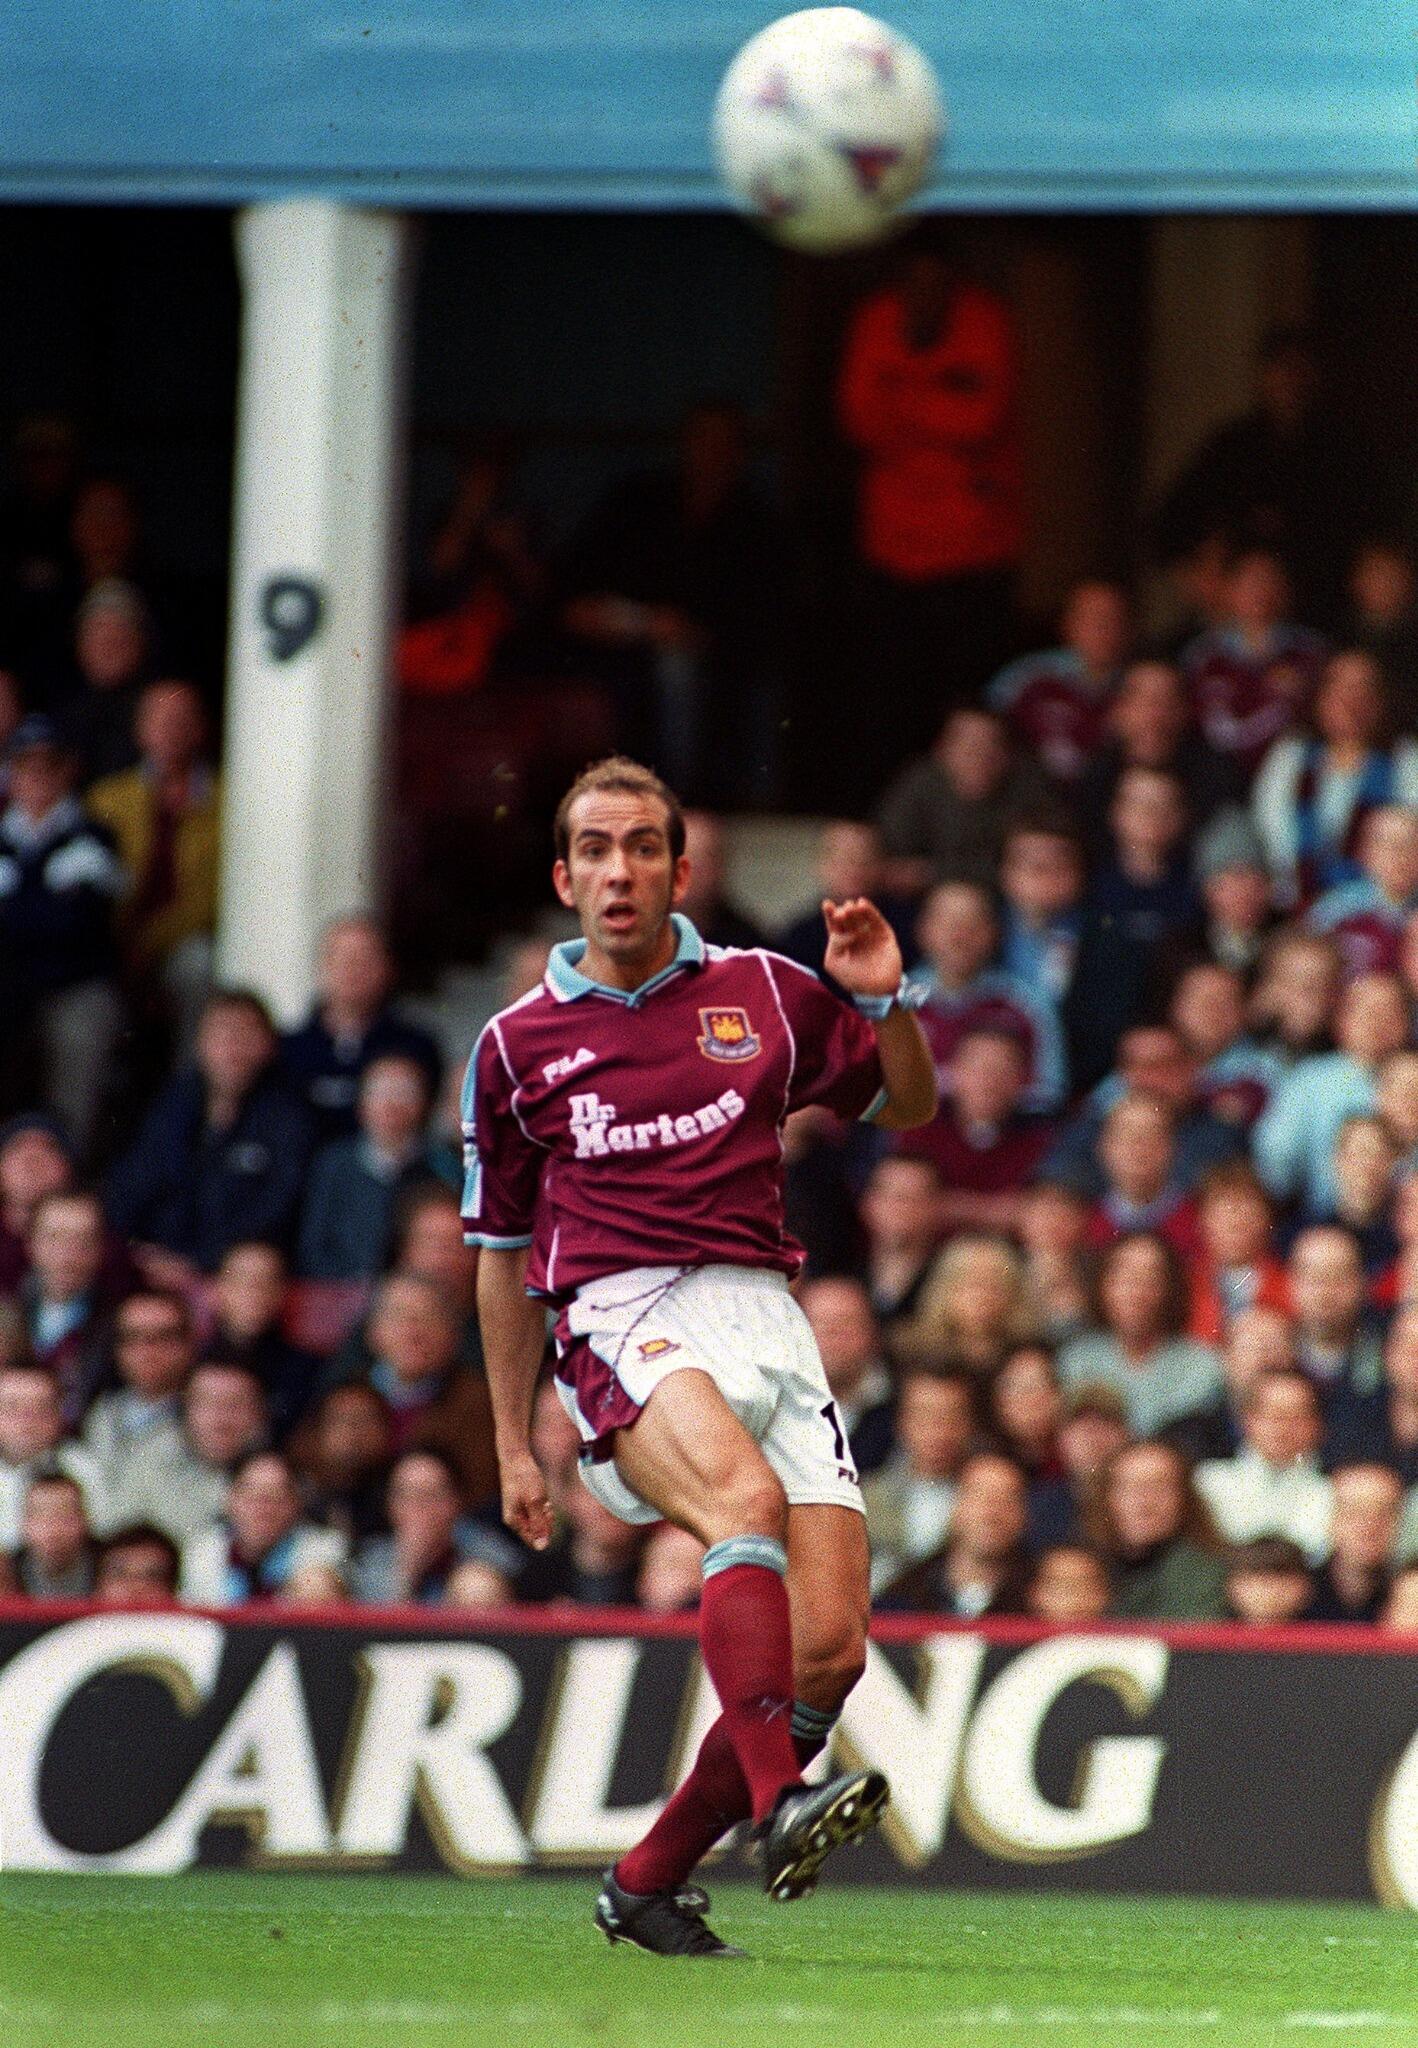 OptaJoe on X: 26/03 - On this day in 2000, Paolo Di Canio's Goal